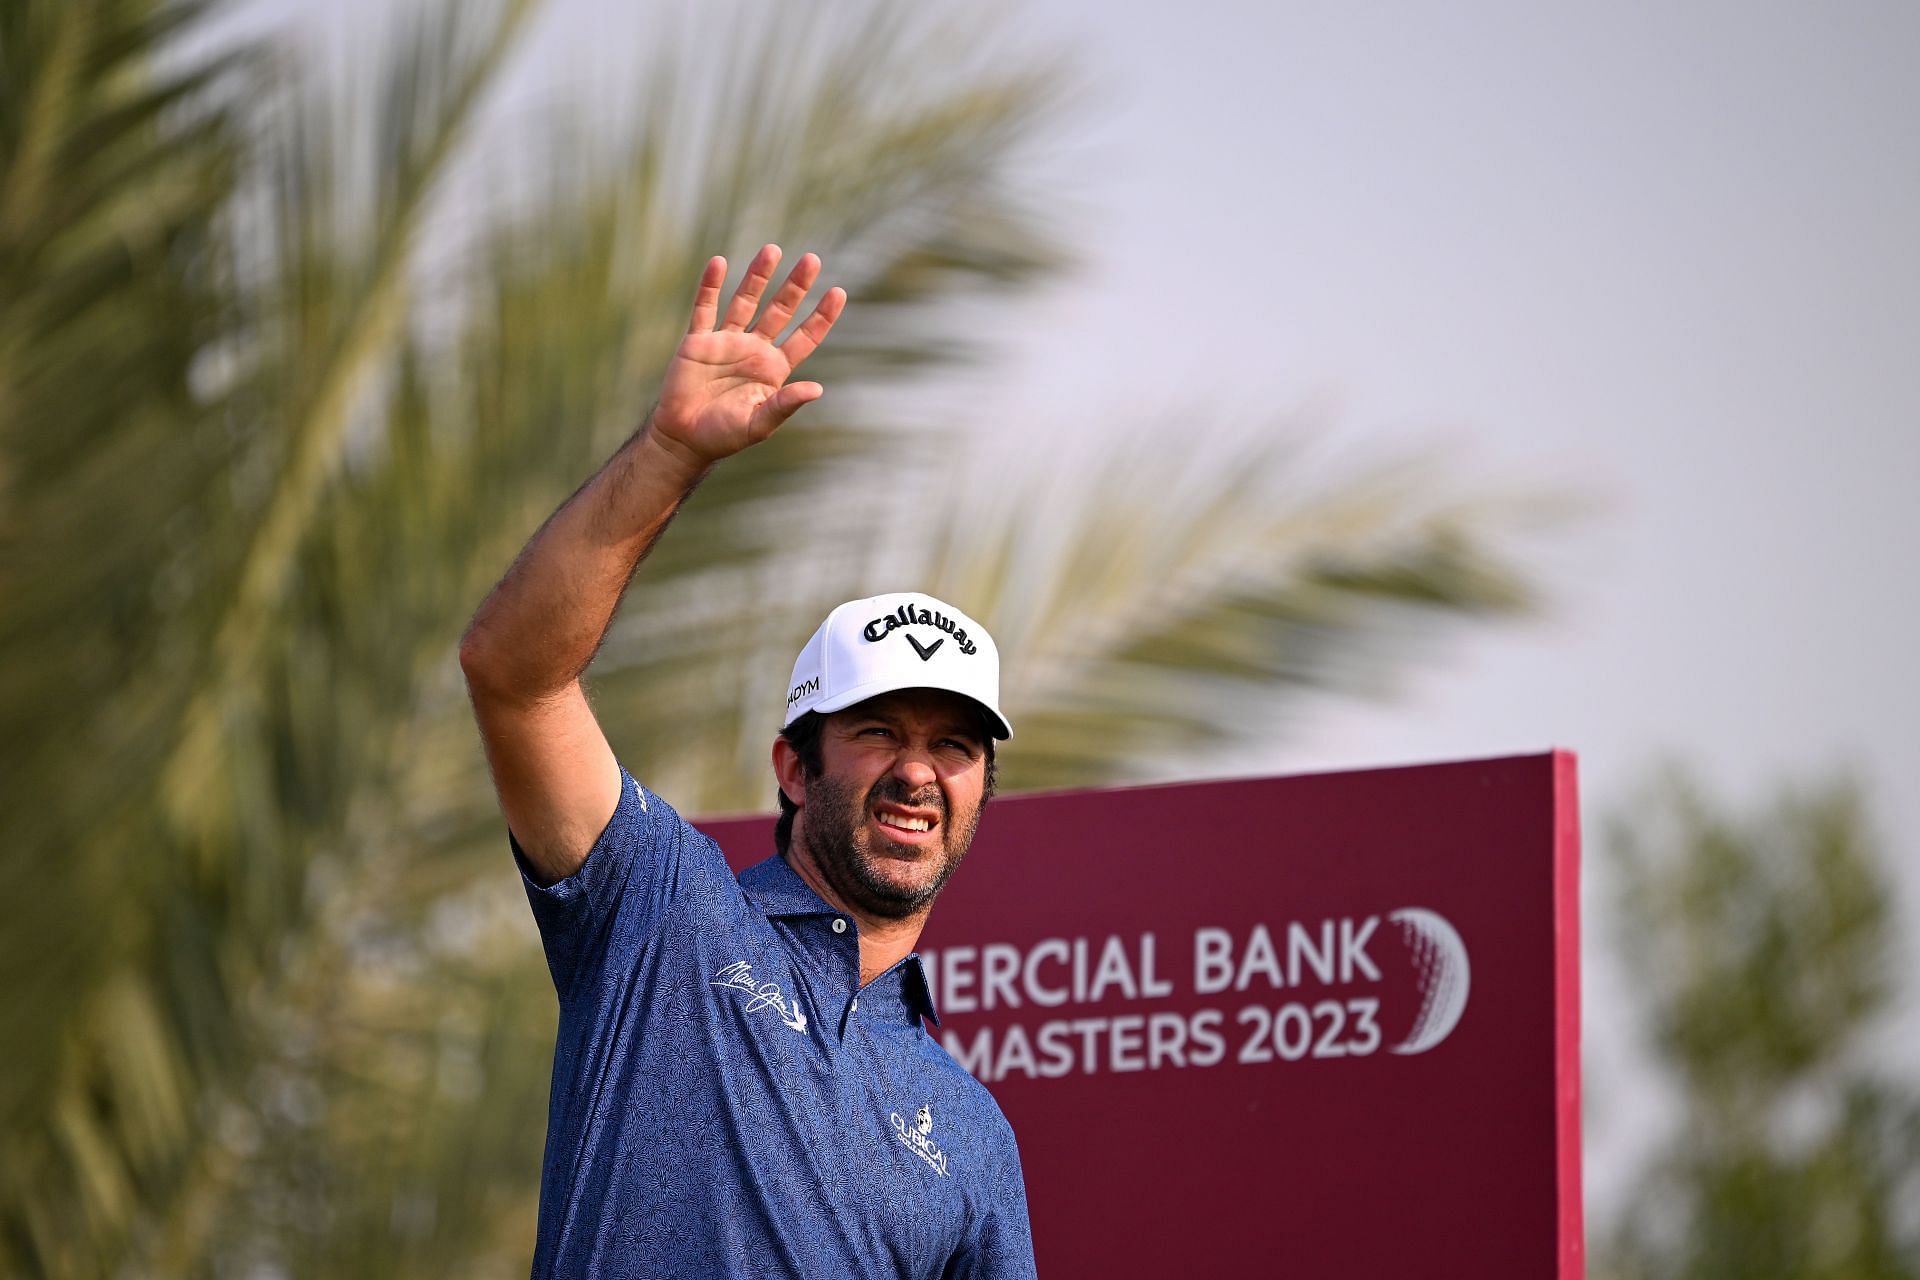 Why was the 2023 Qatar Masters Day 3 suspended? Exploring the reason